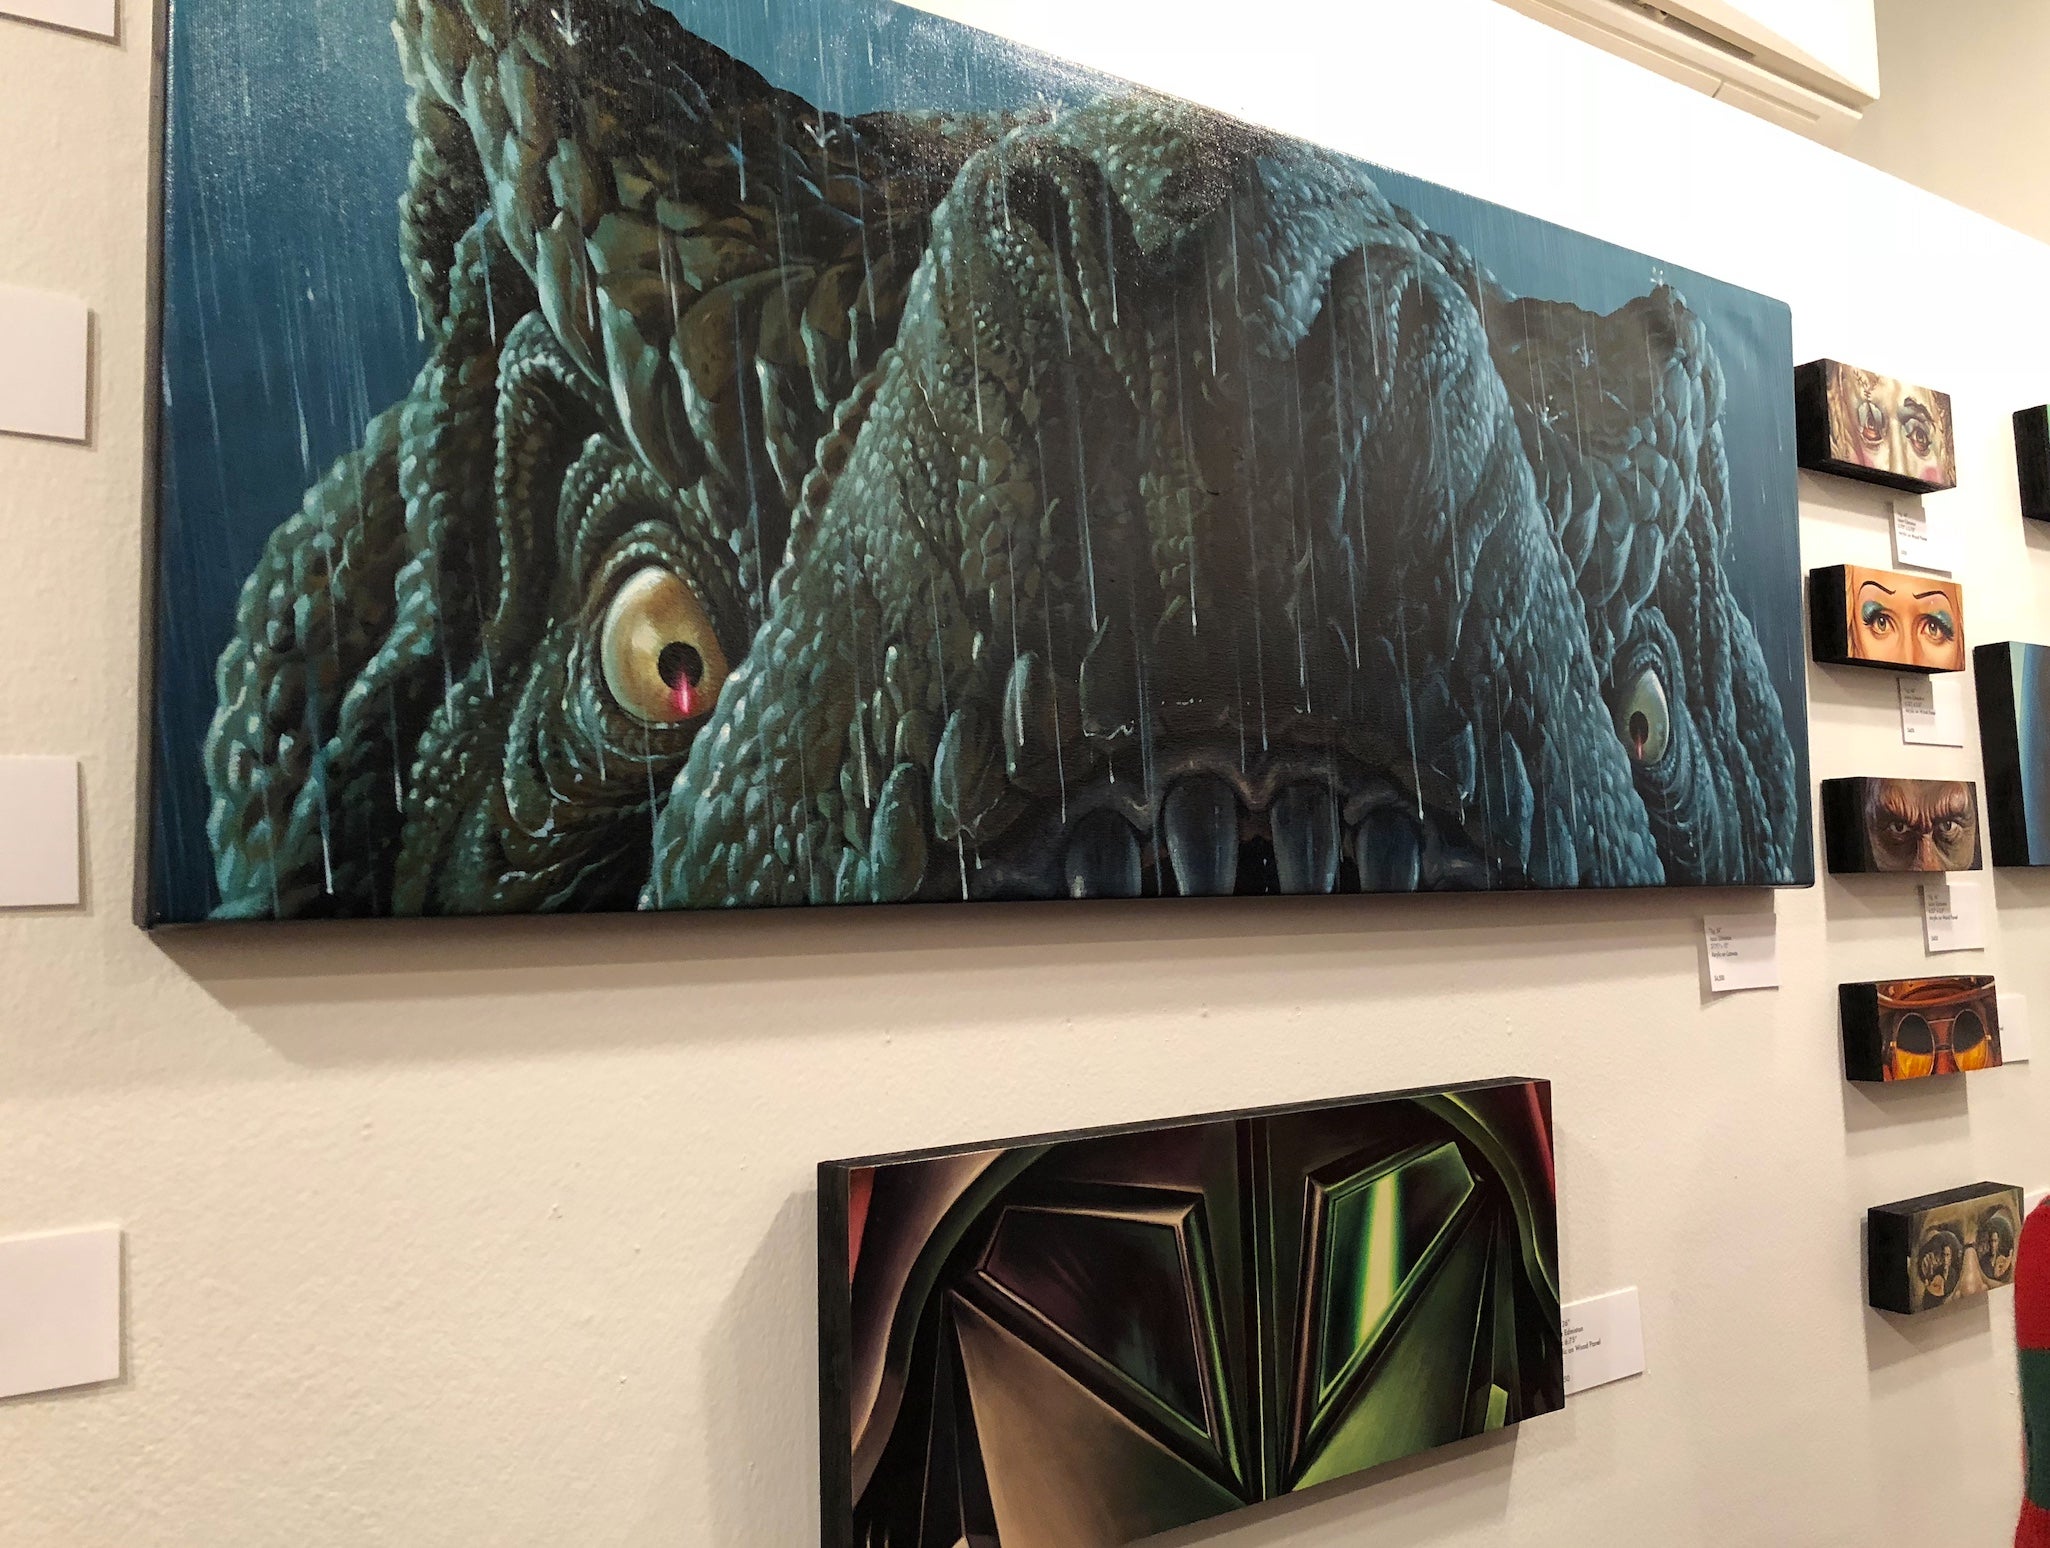 An image from the 2018 gallery show of eyes being to scale.  (Photo: Gizmodo)